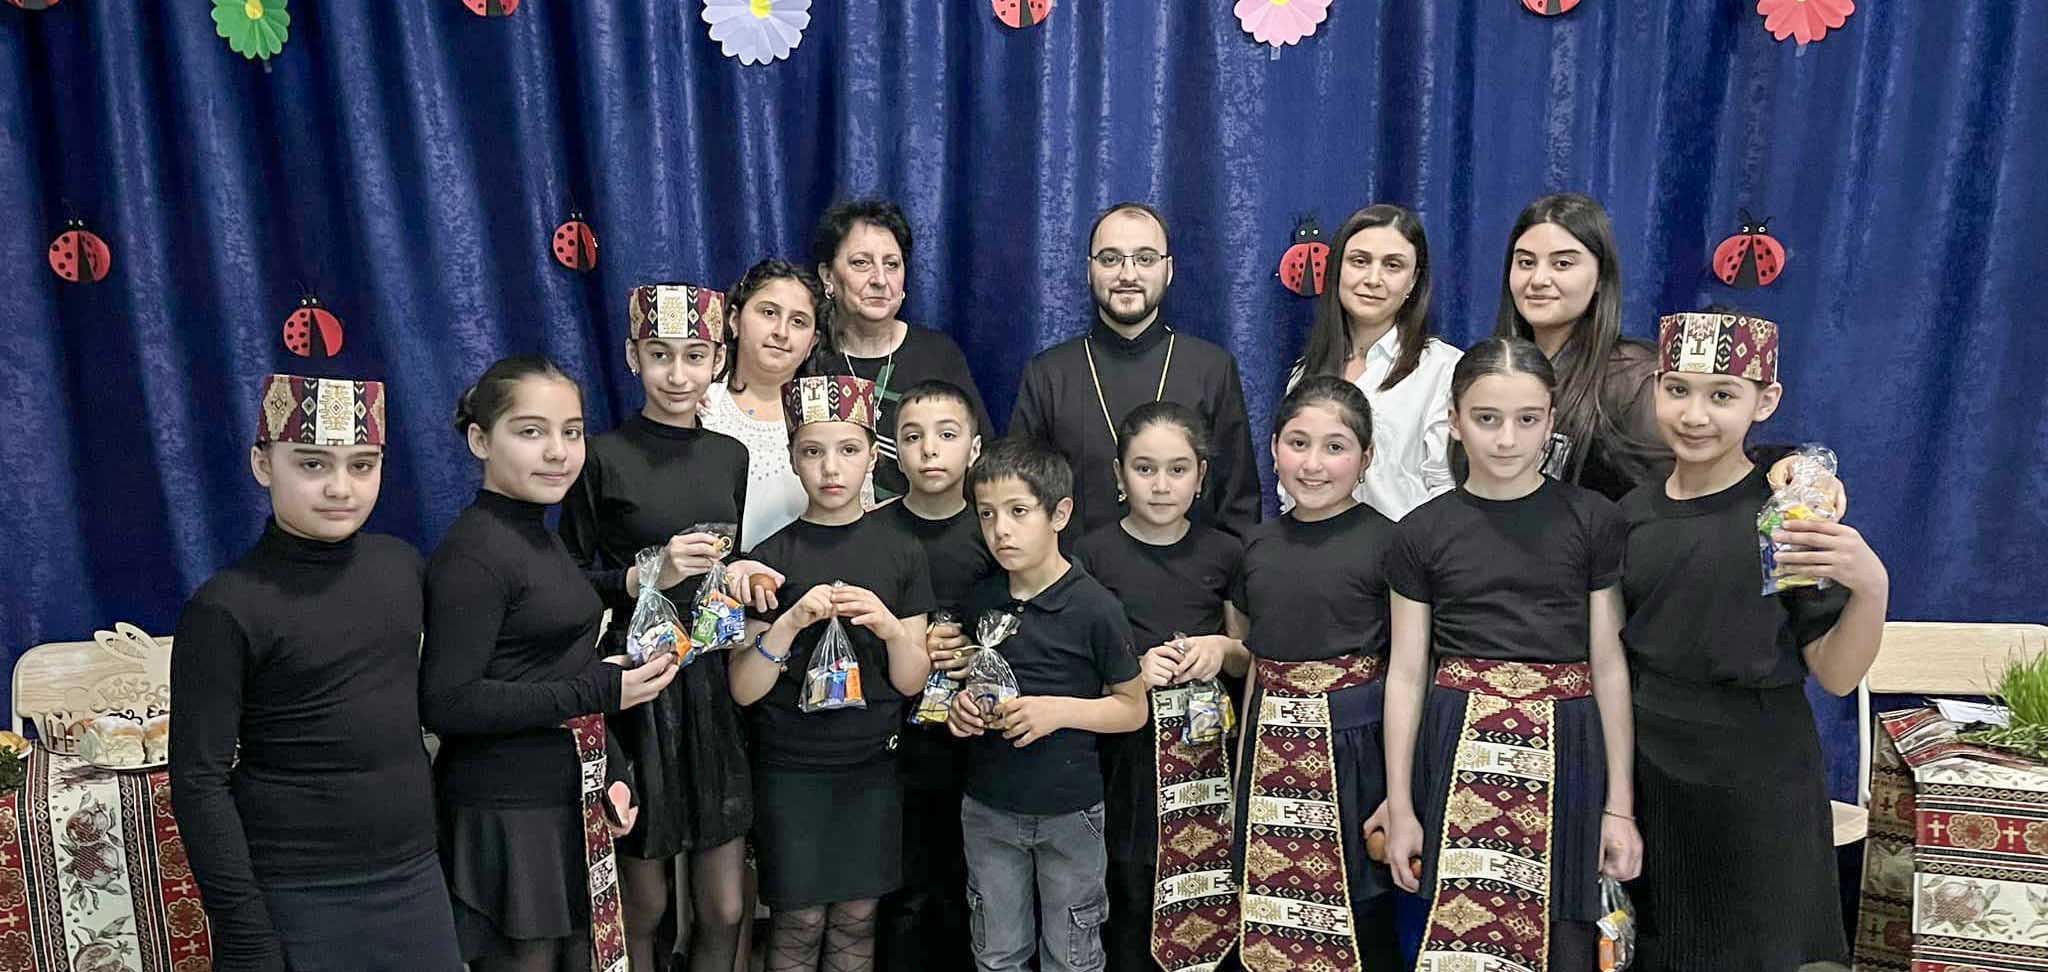 Easter event at Saint Gregory of Narek Spiritual, Educational and Cultural Center in Rustavi city